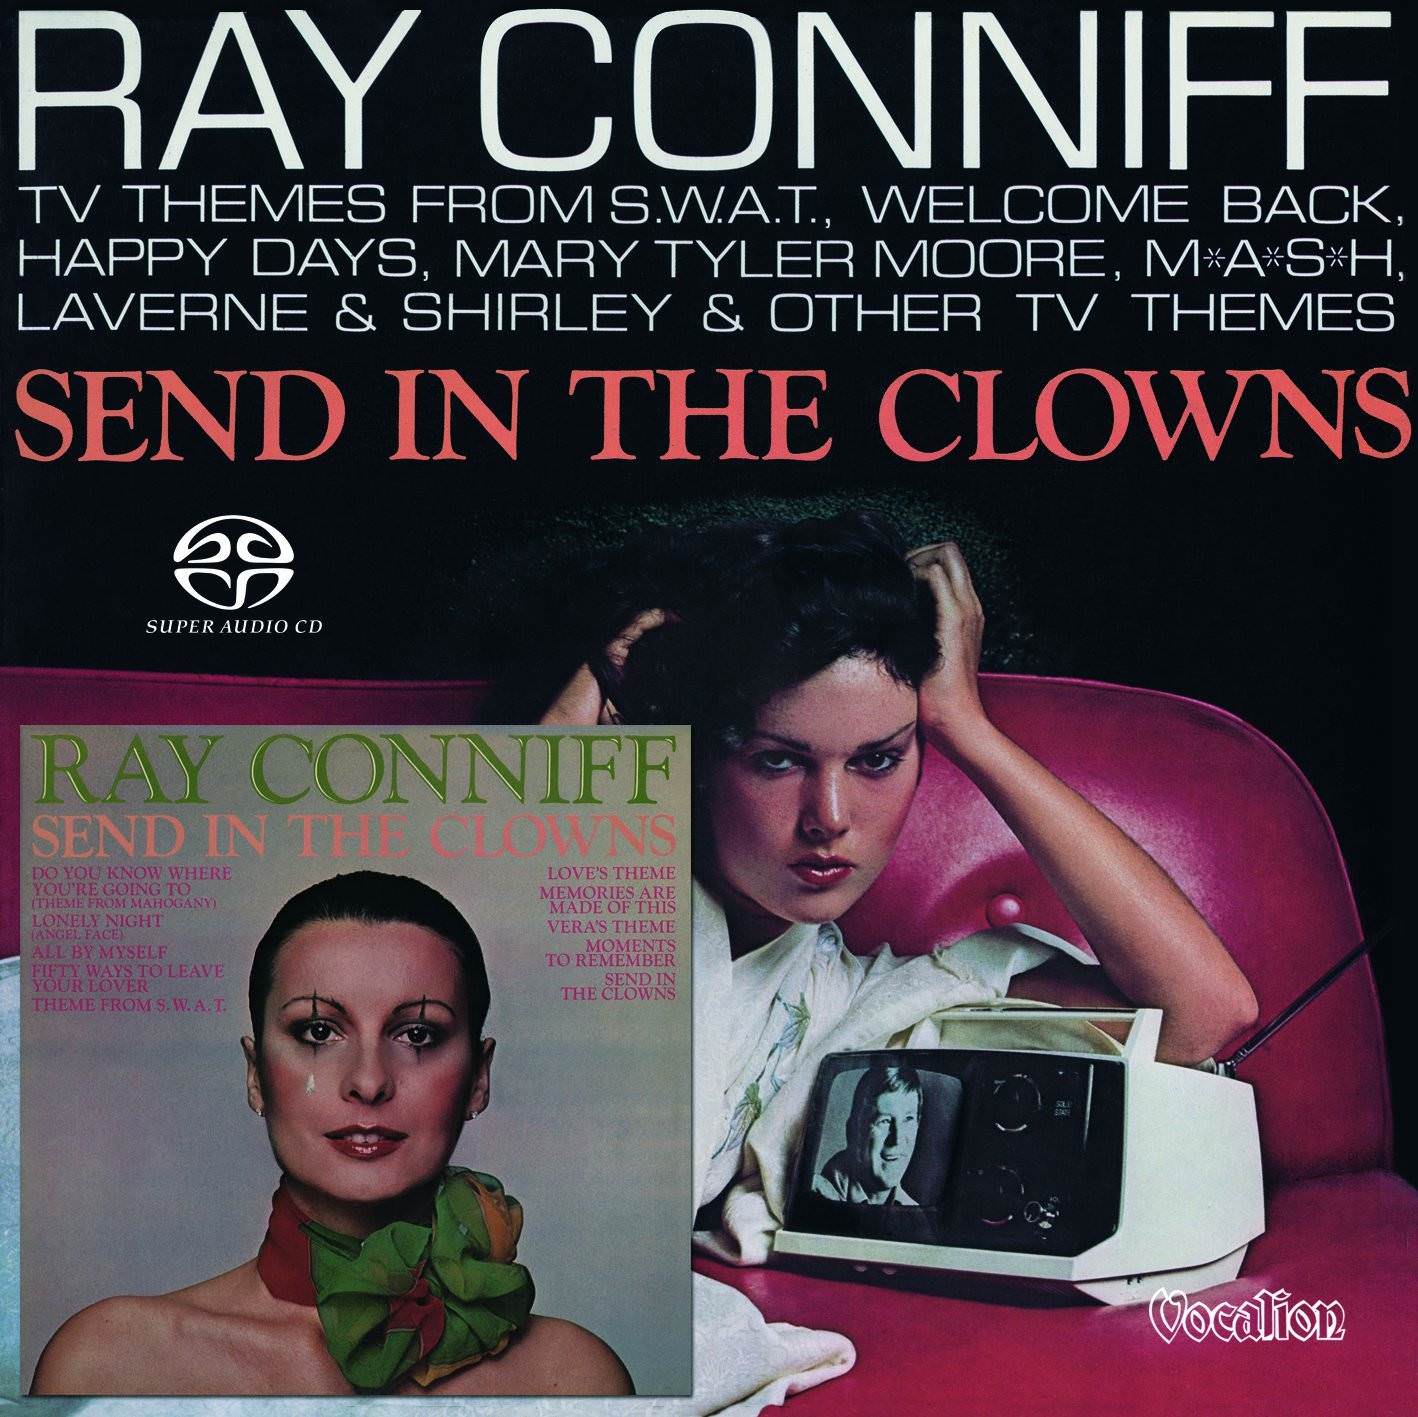 Ray Conniff - Theme from SWAT & Other TV Themes & Send In The Clowns (1976) [Reissue 2018] {SACD ISO + FLAC 24bit/88,2kHz}